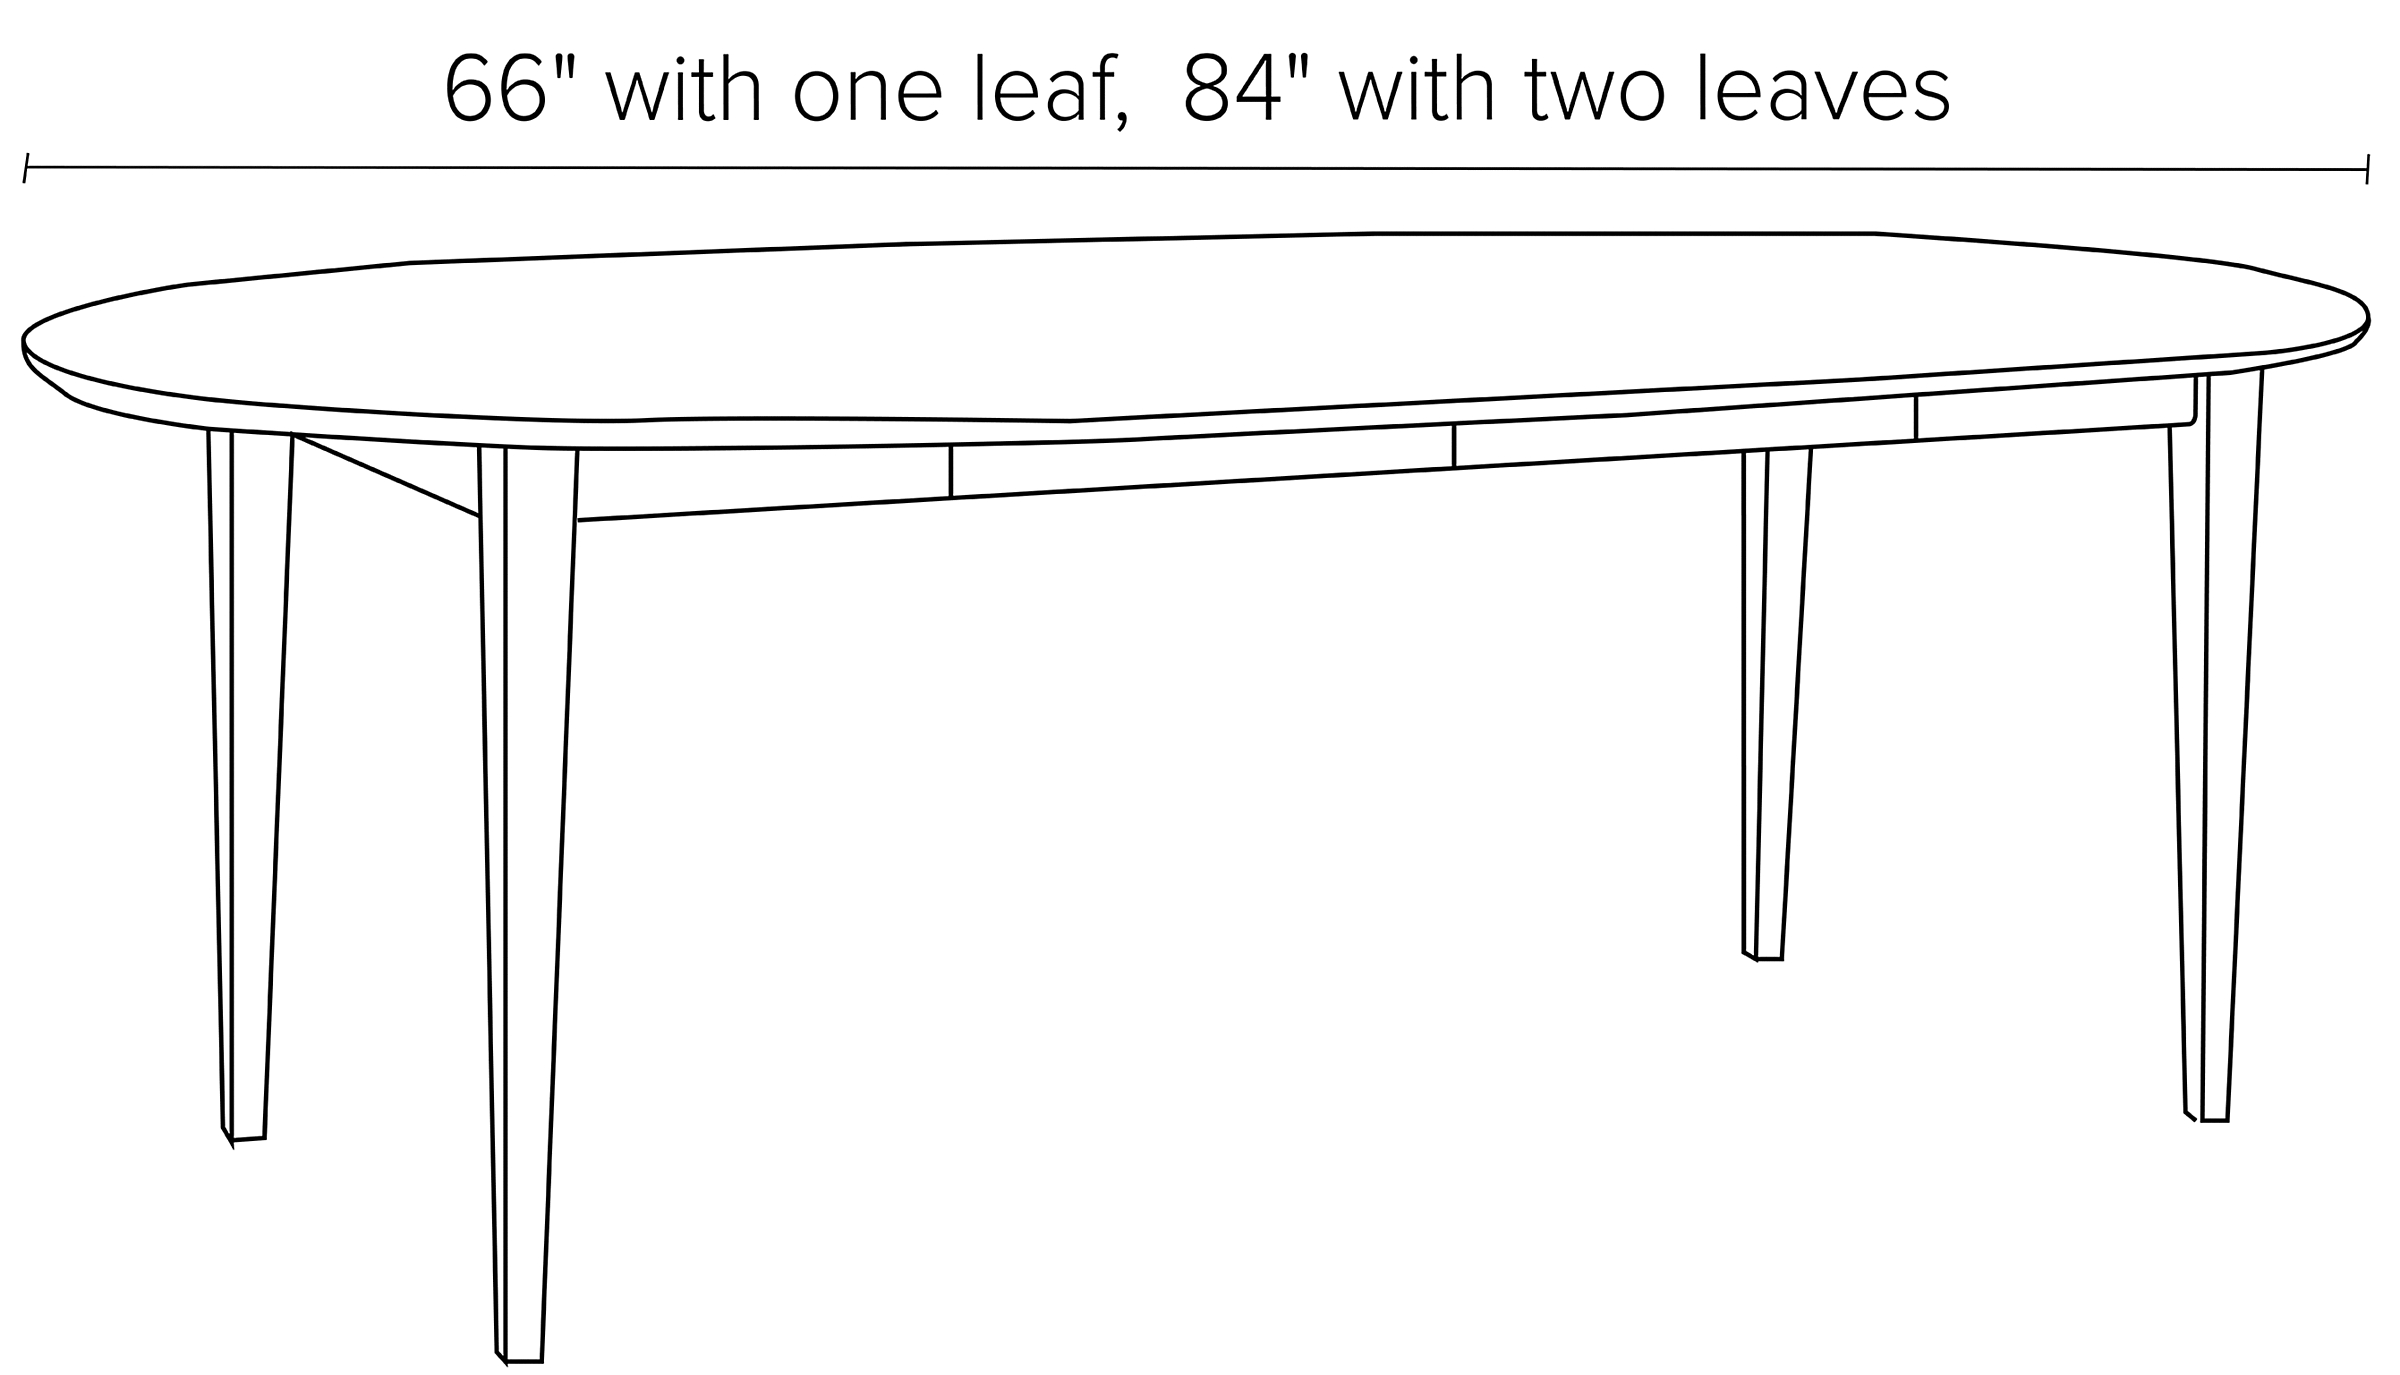 Illustration of Adams extension table extended.